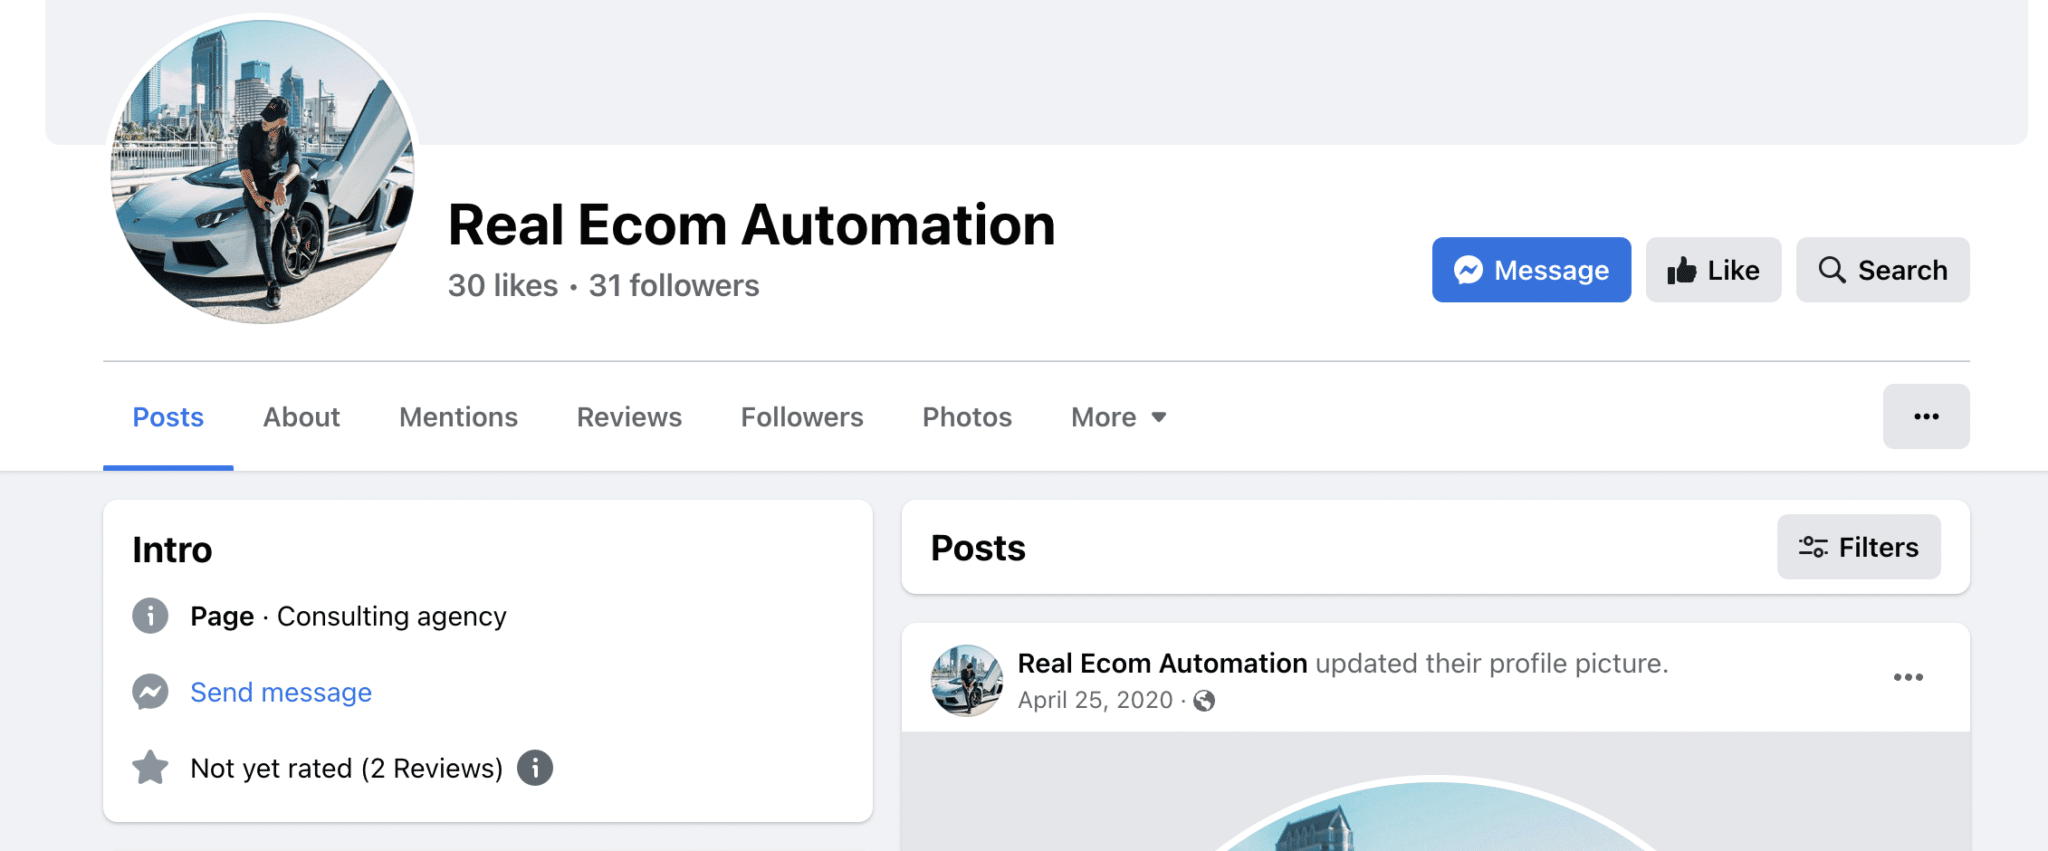 The Real Ecom Automation page